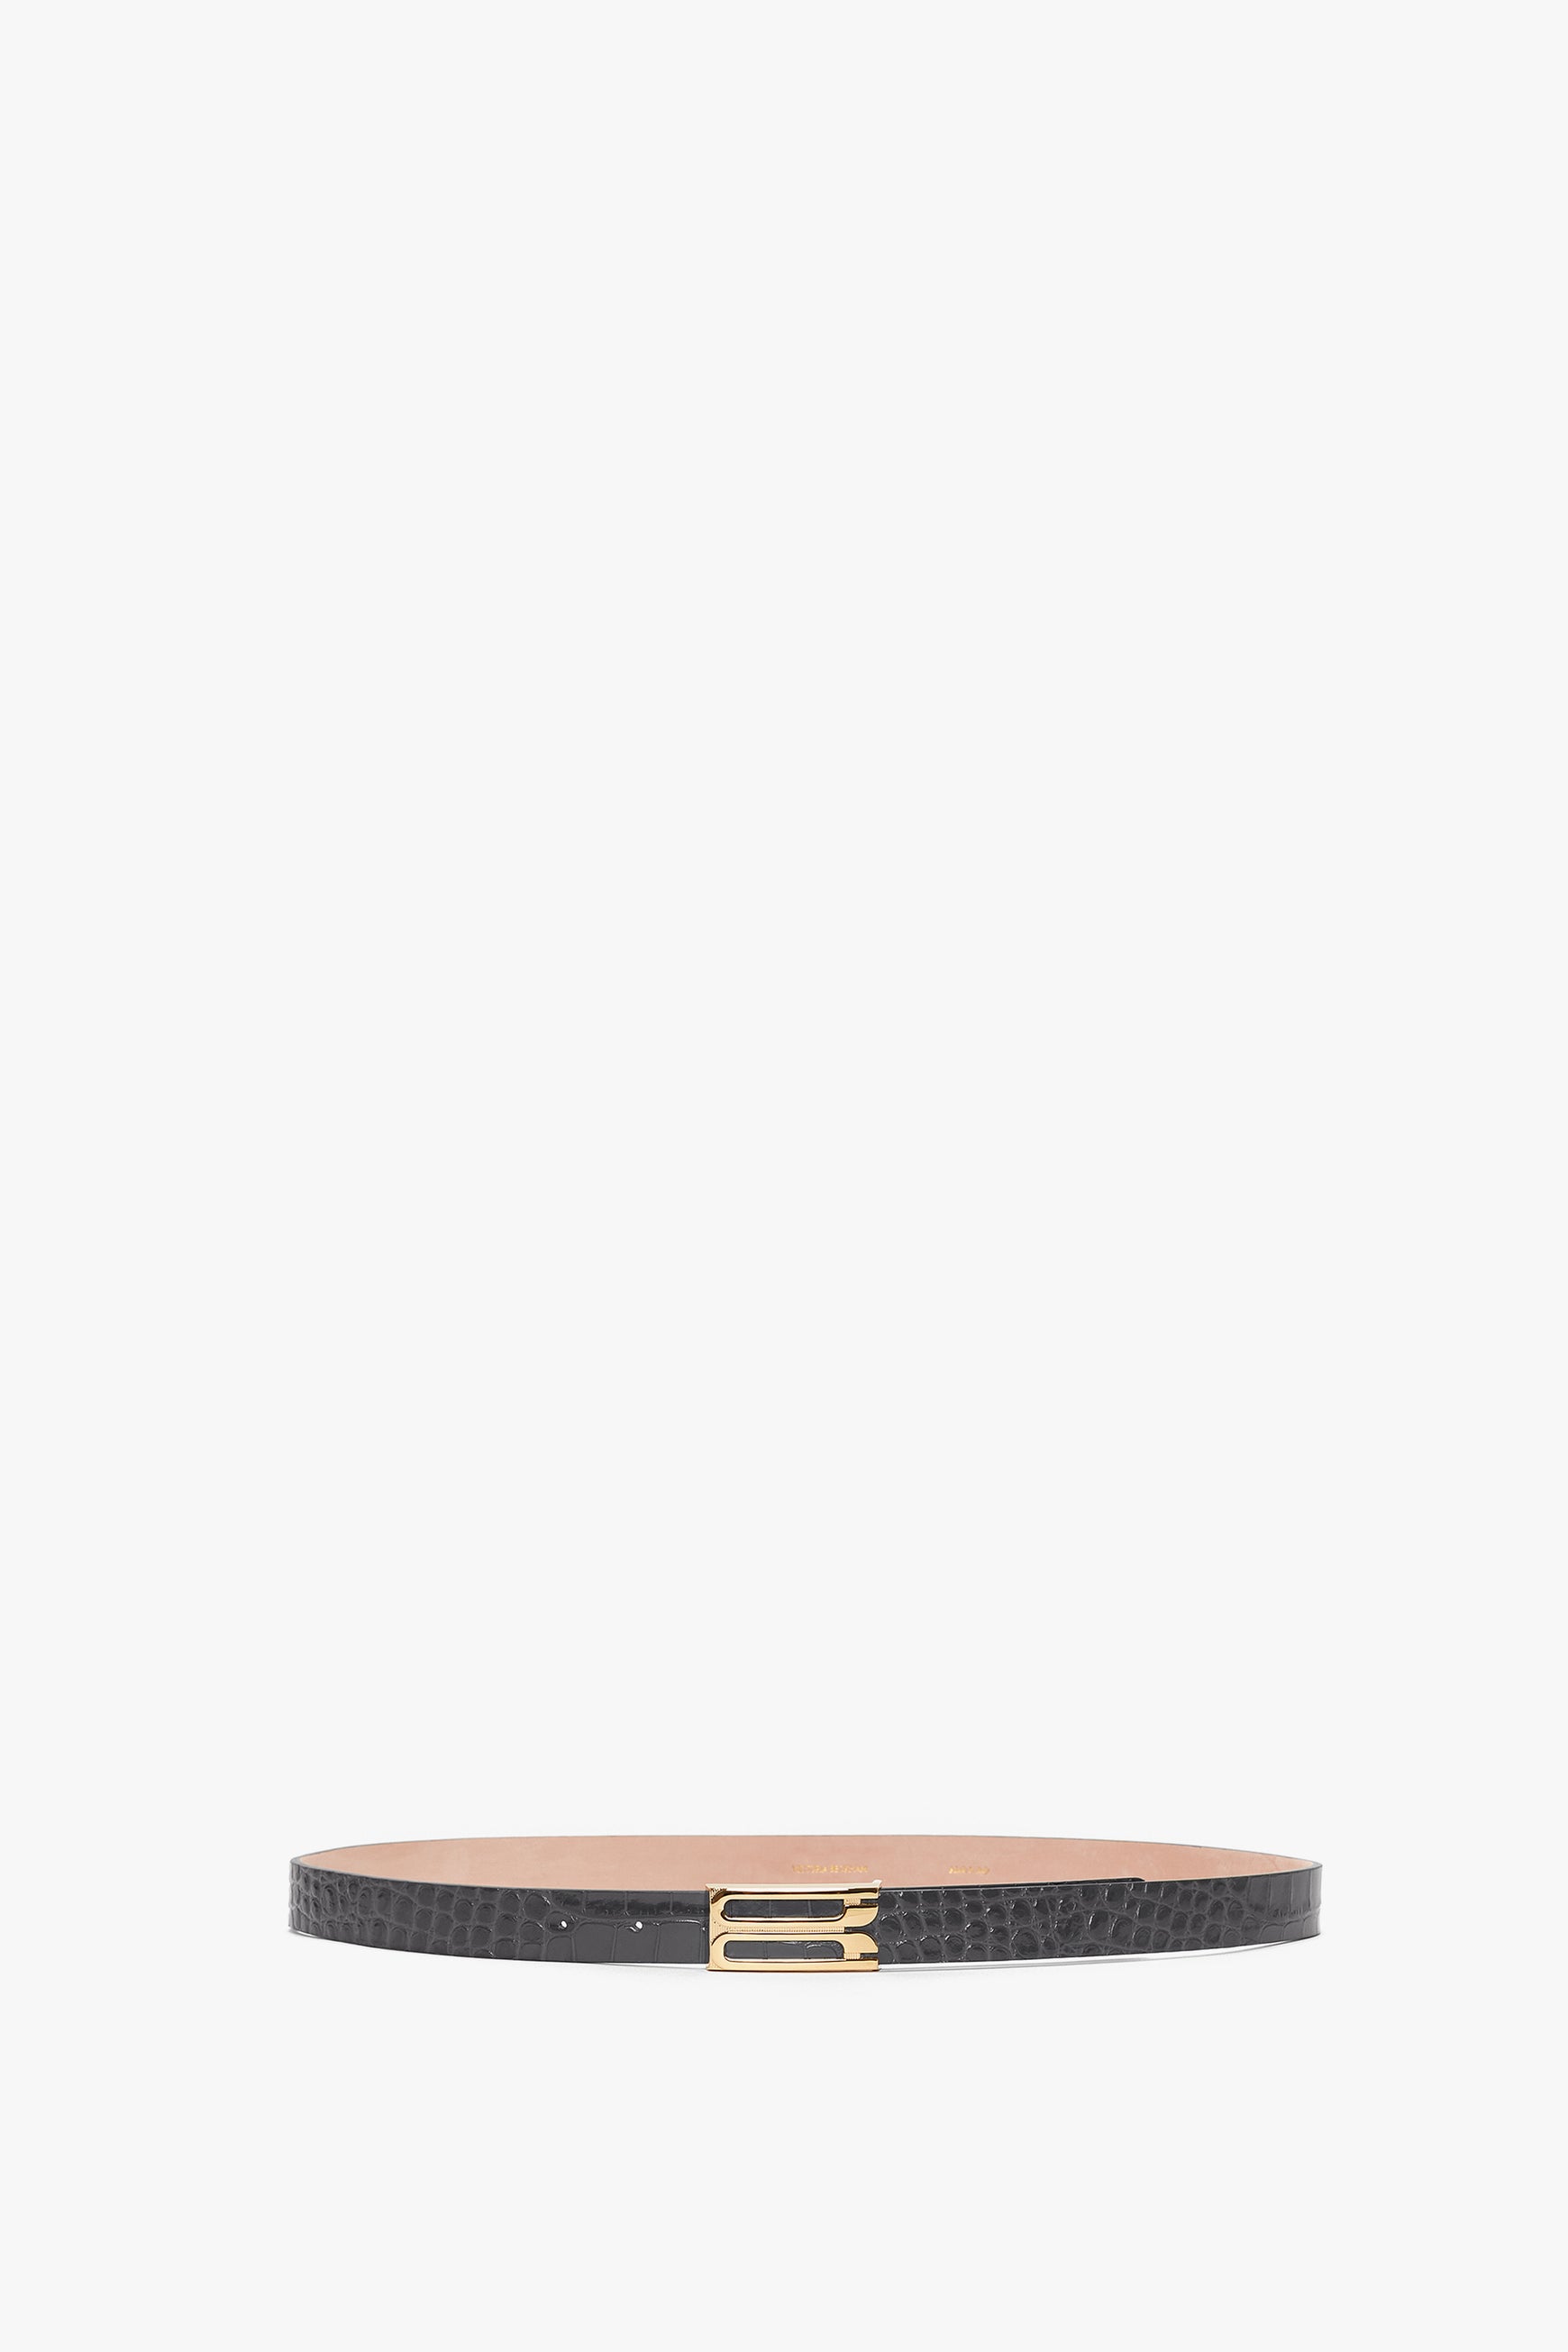 A thin, slate grey Frame Belt In Slate Grey Croc Embossed Calf Leather crafted from croc-embossed calf leather features a gold rectangular buckle on a white background by Victoria Beckham.